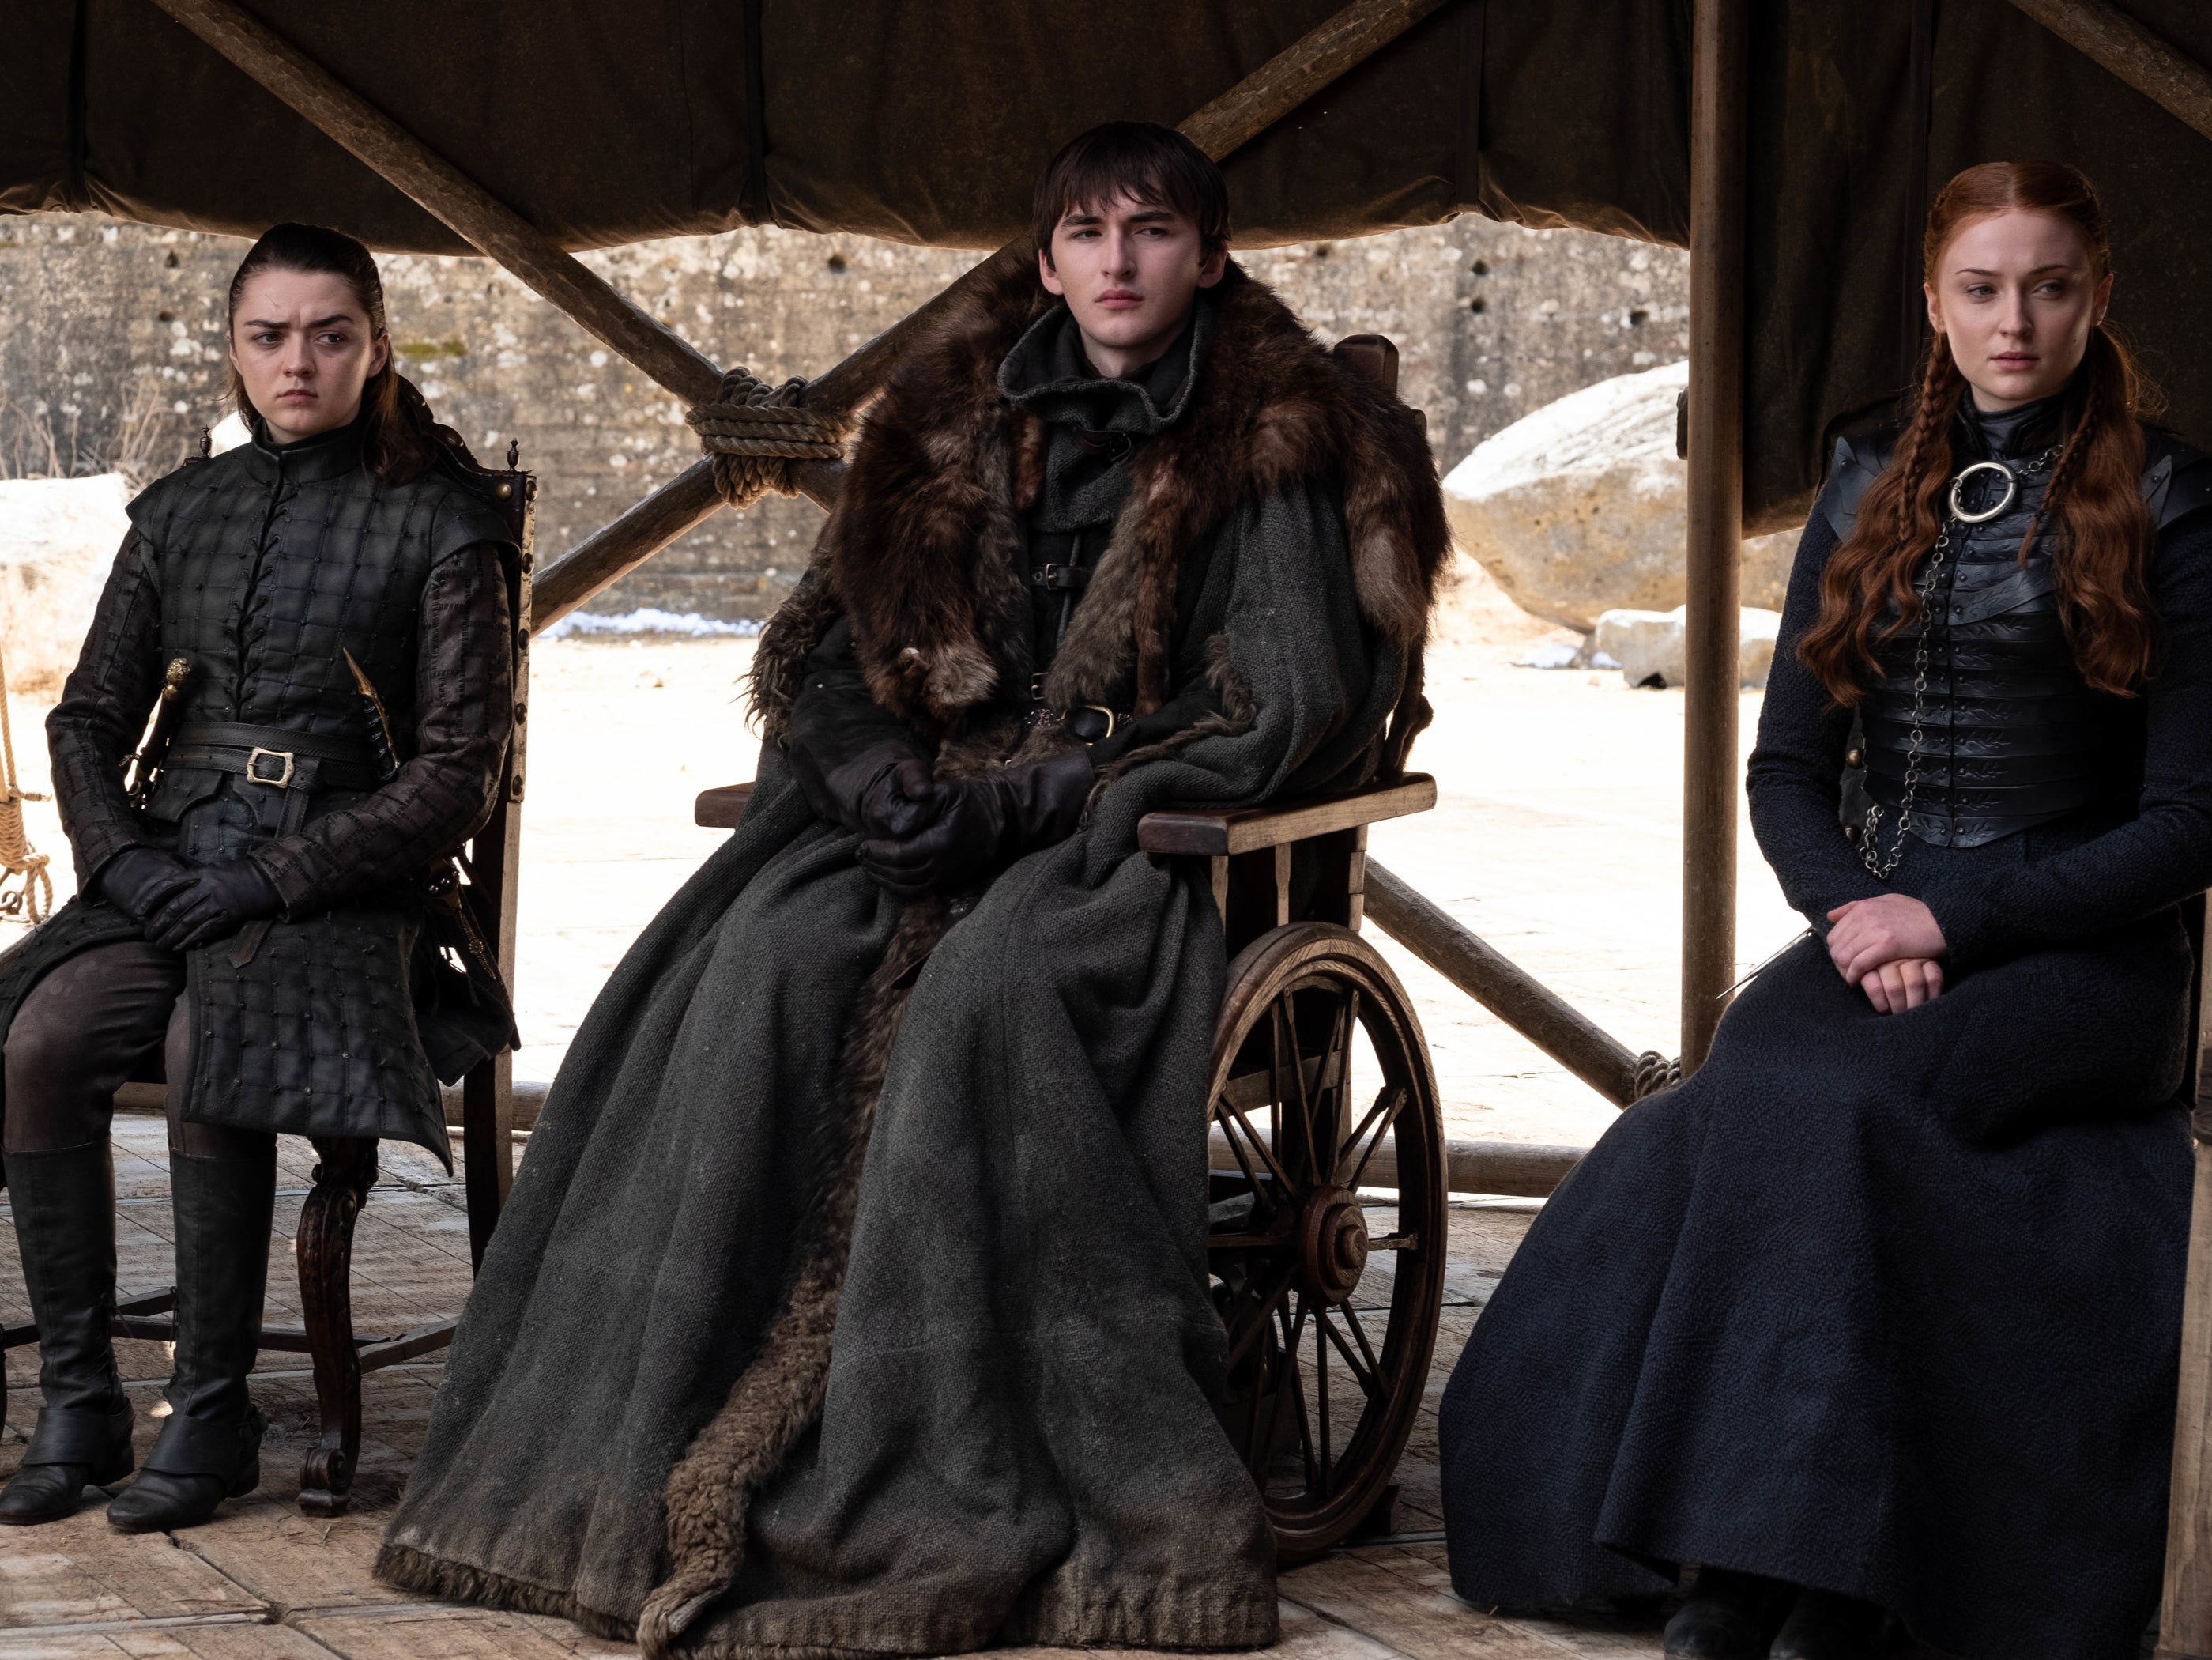 The Stark siblings assemble during the final episode of Game of Thrones